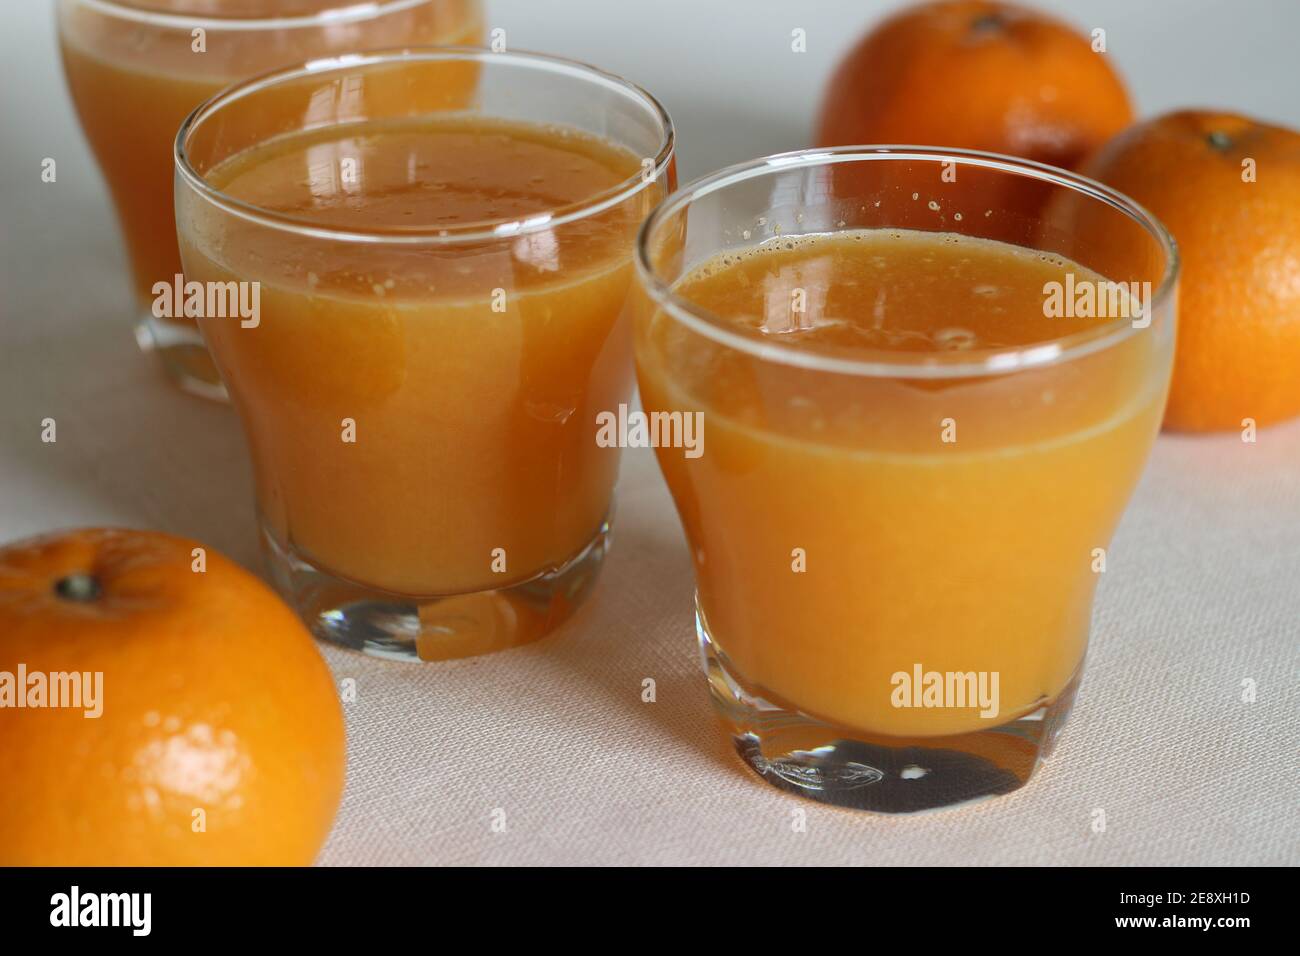 Homemade pure Malta orange juice. Malta is citrus fruit grown in India. It is commonly called as sangtra. Stock Photo